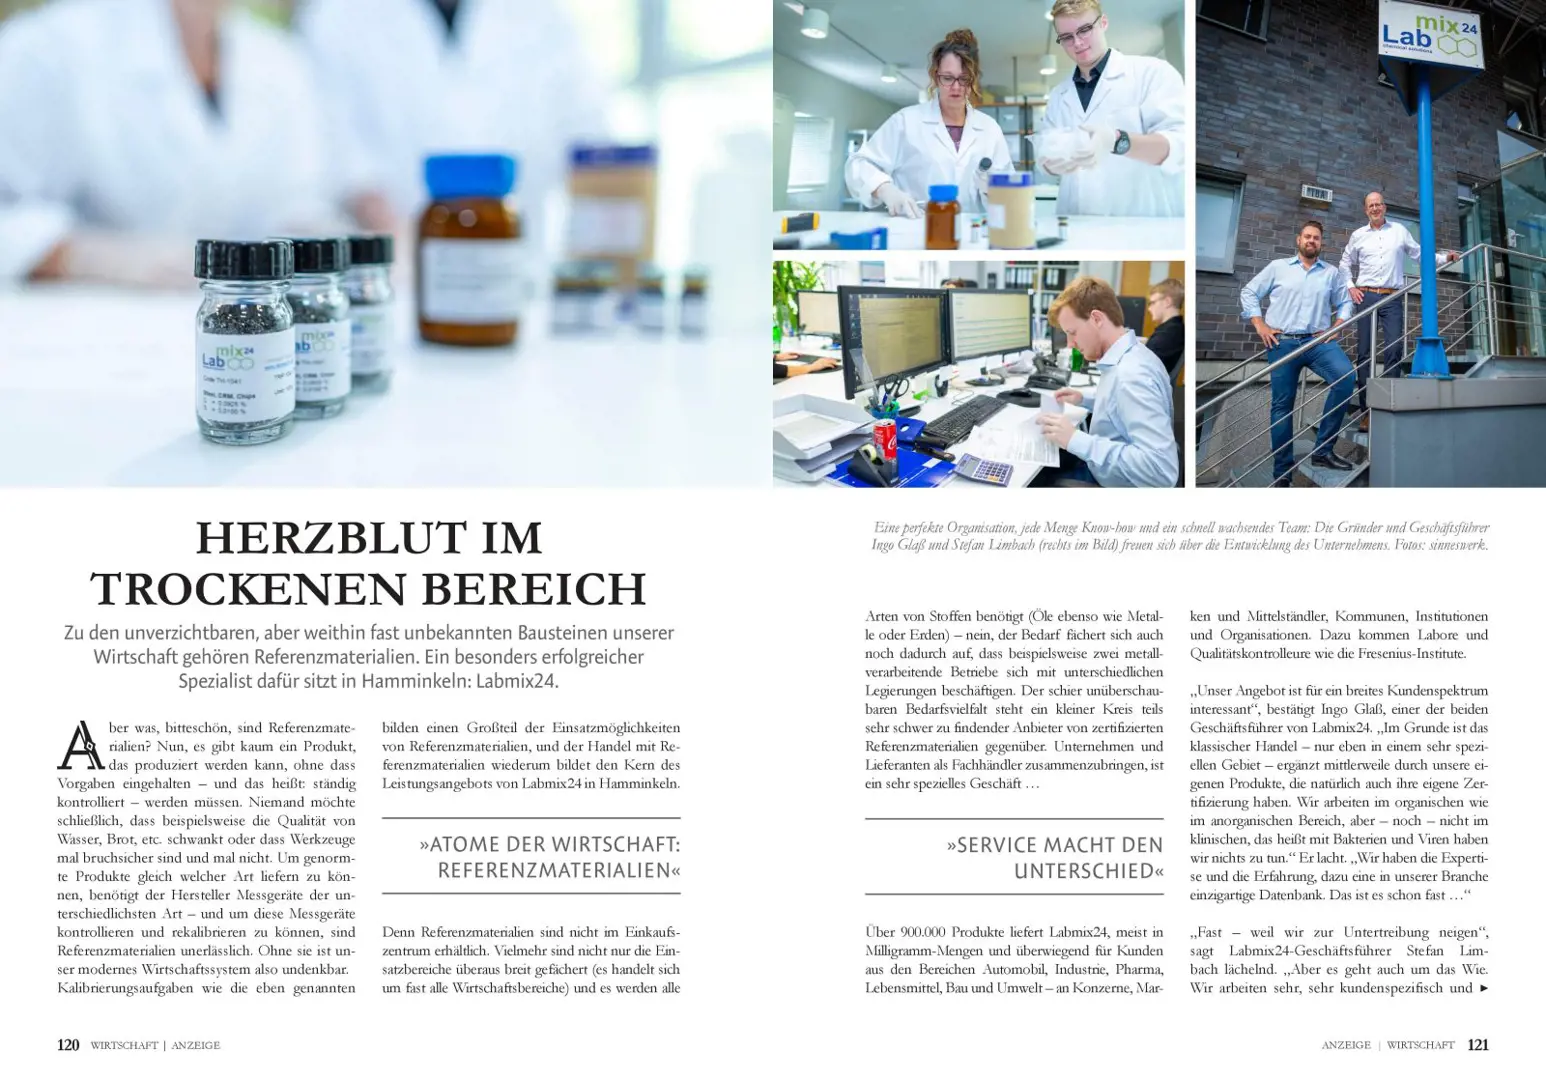 First 2 pages of the article featuring Labmix24 in the magazine Vier.Sechs.Drei.